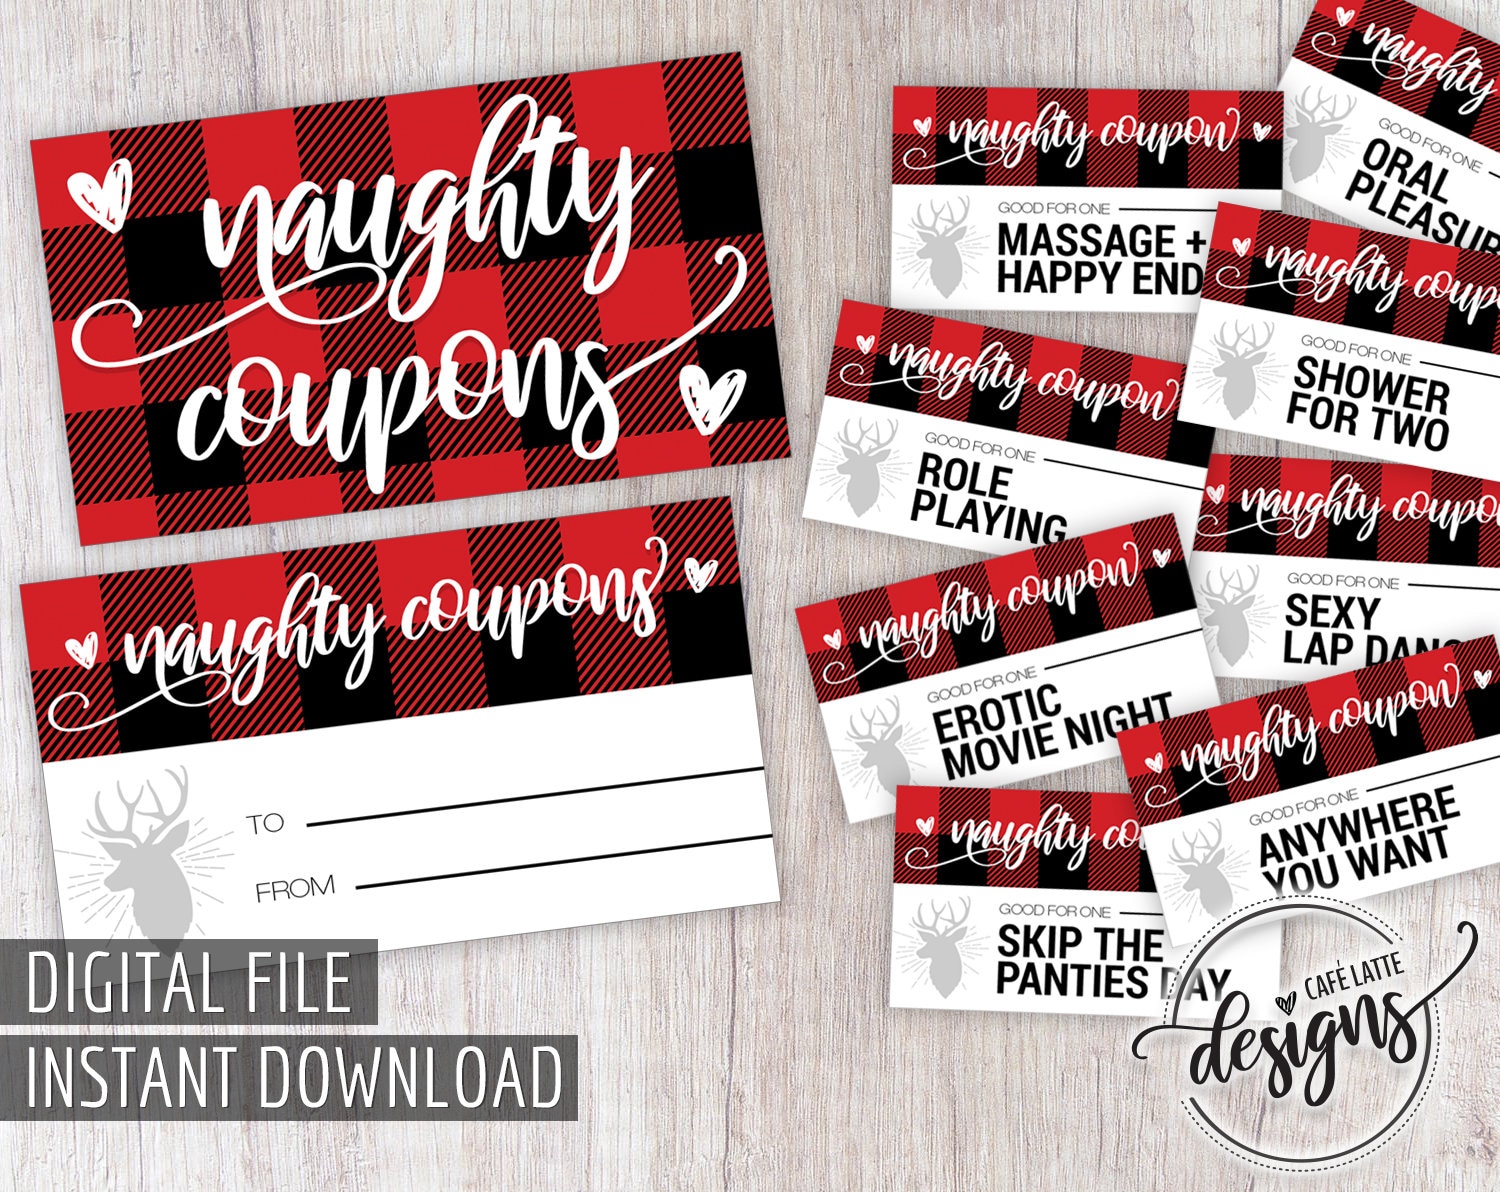 Sexy Naughty Coupons Christmas Gift Love Sex Coupons Gifts